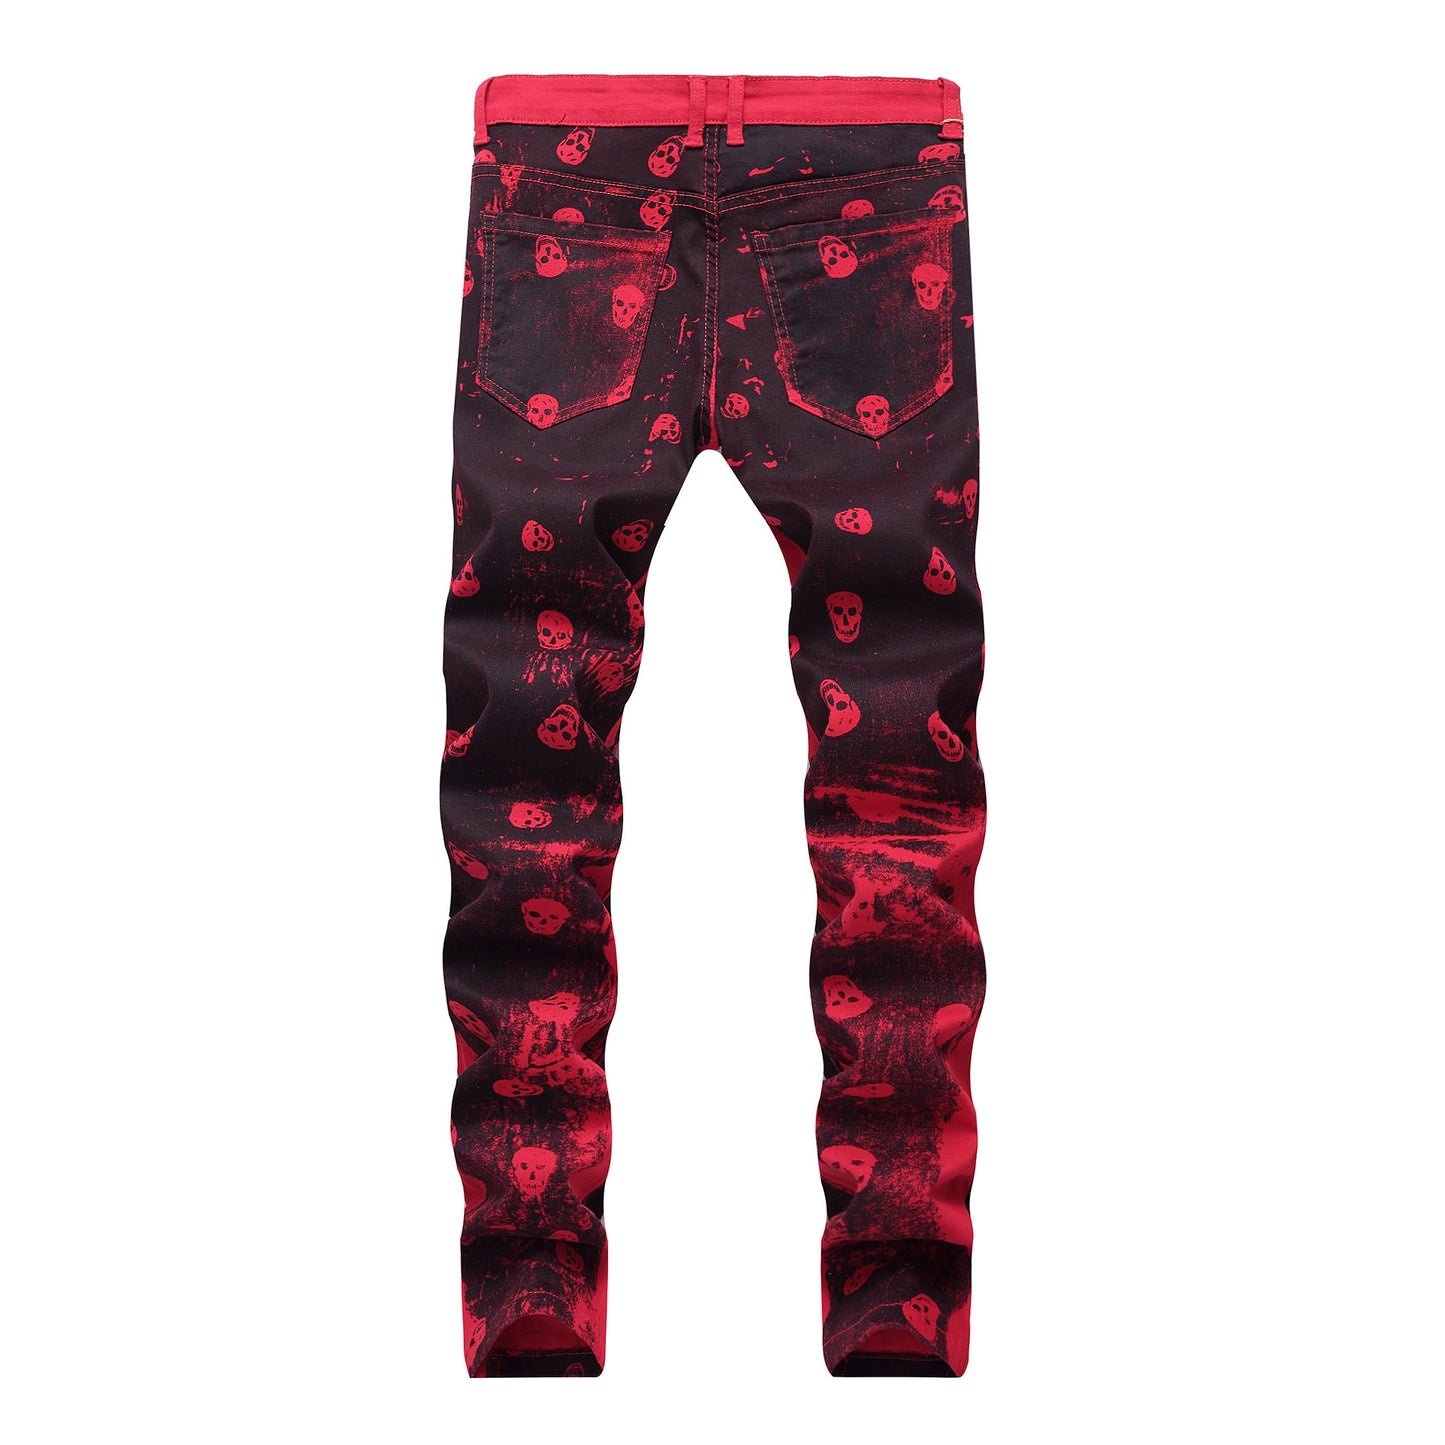 Skull red jeans men's casual jeans